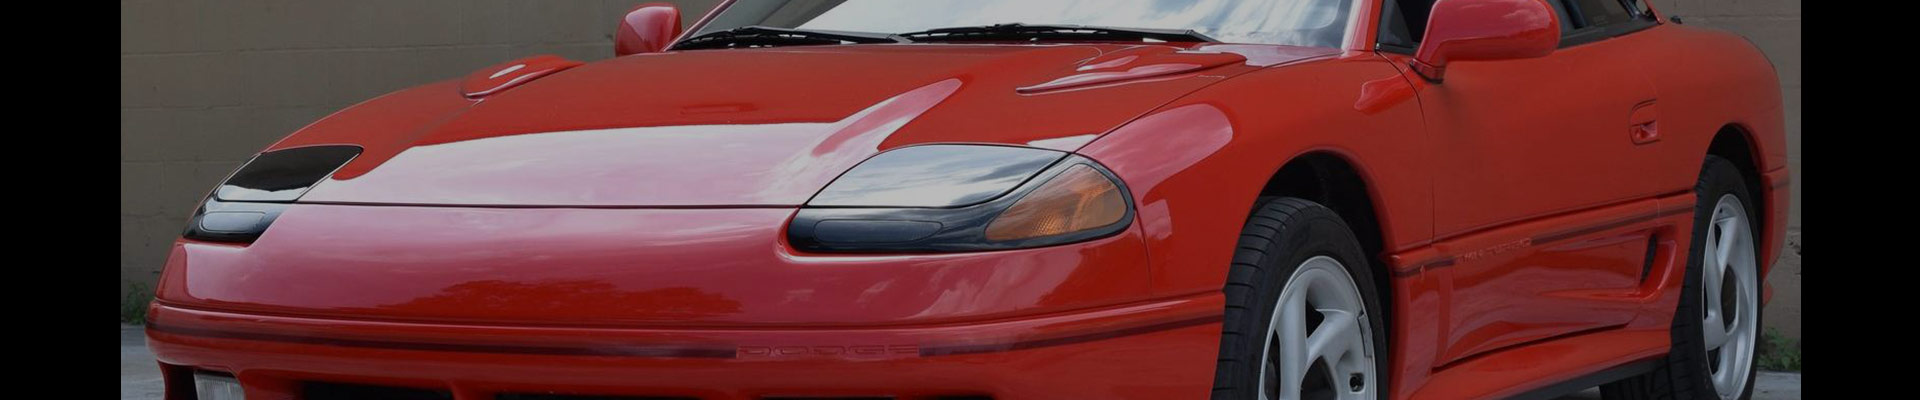 Shop Replacement and OEM Dodge Stealth Parts with Discounted Price on the Net